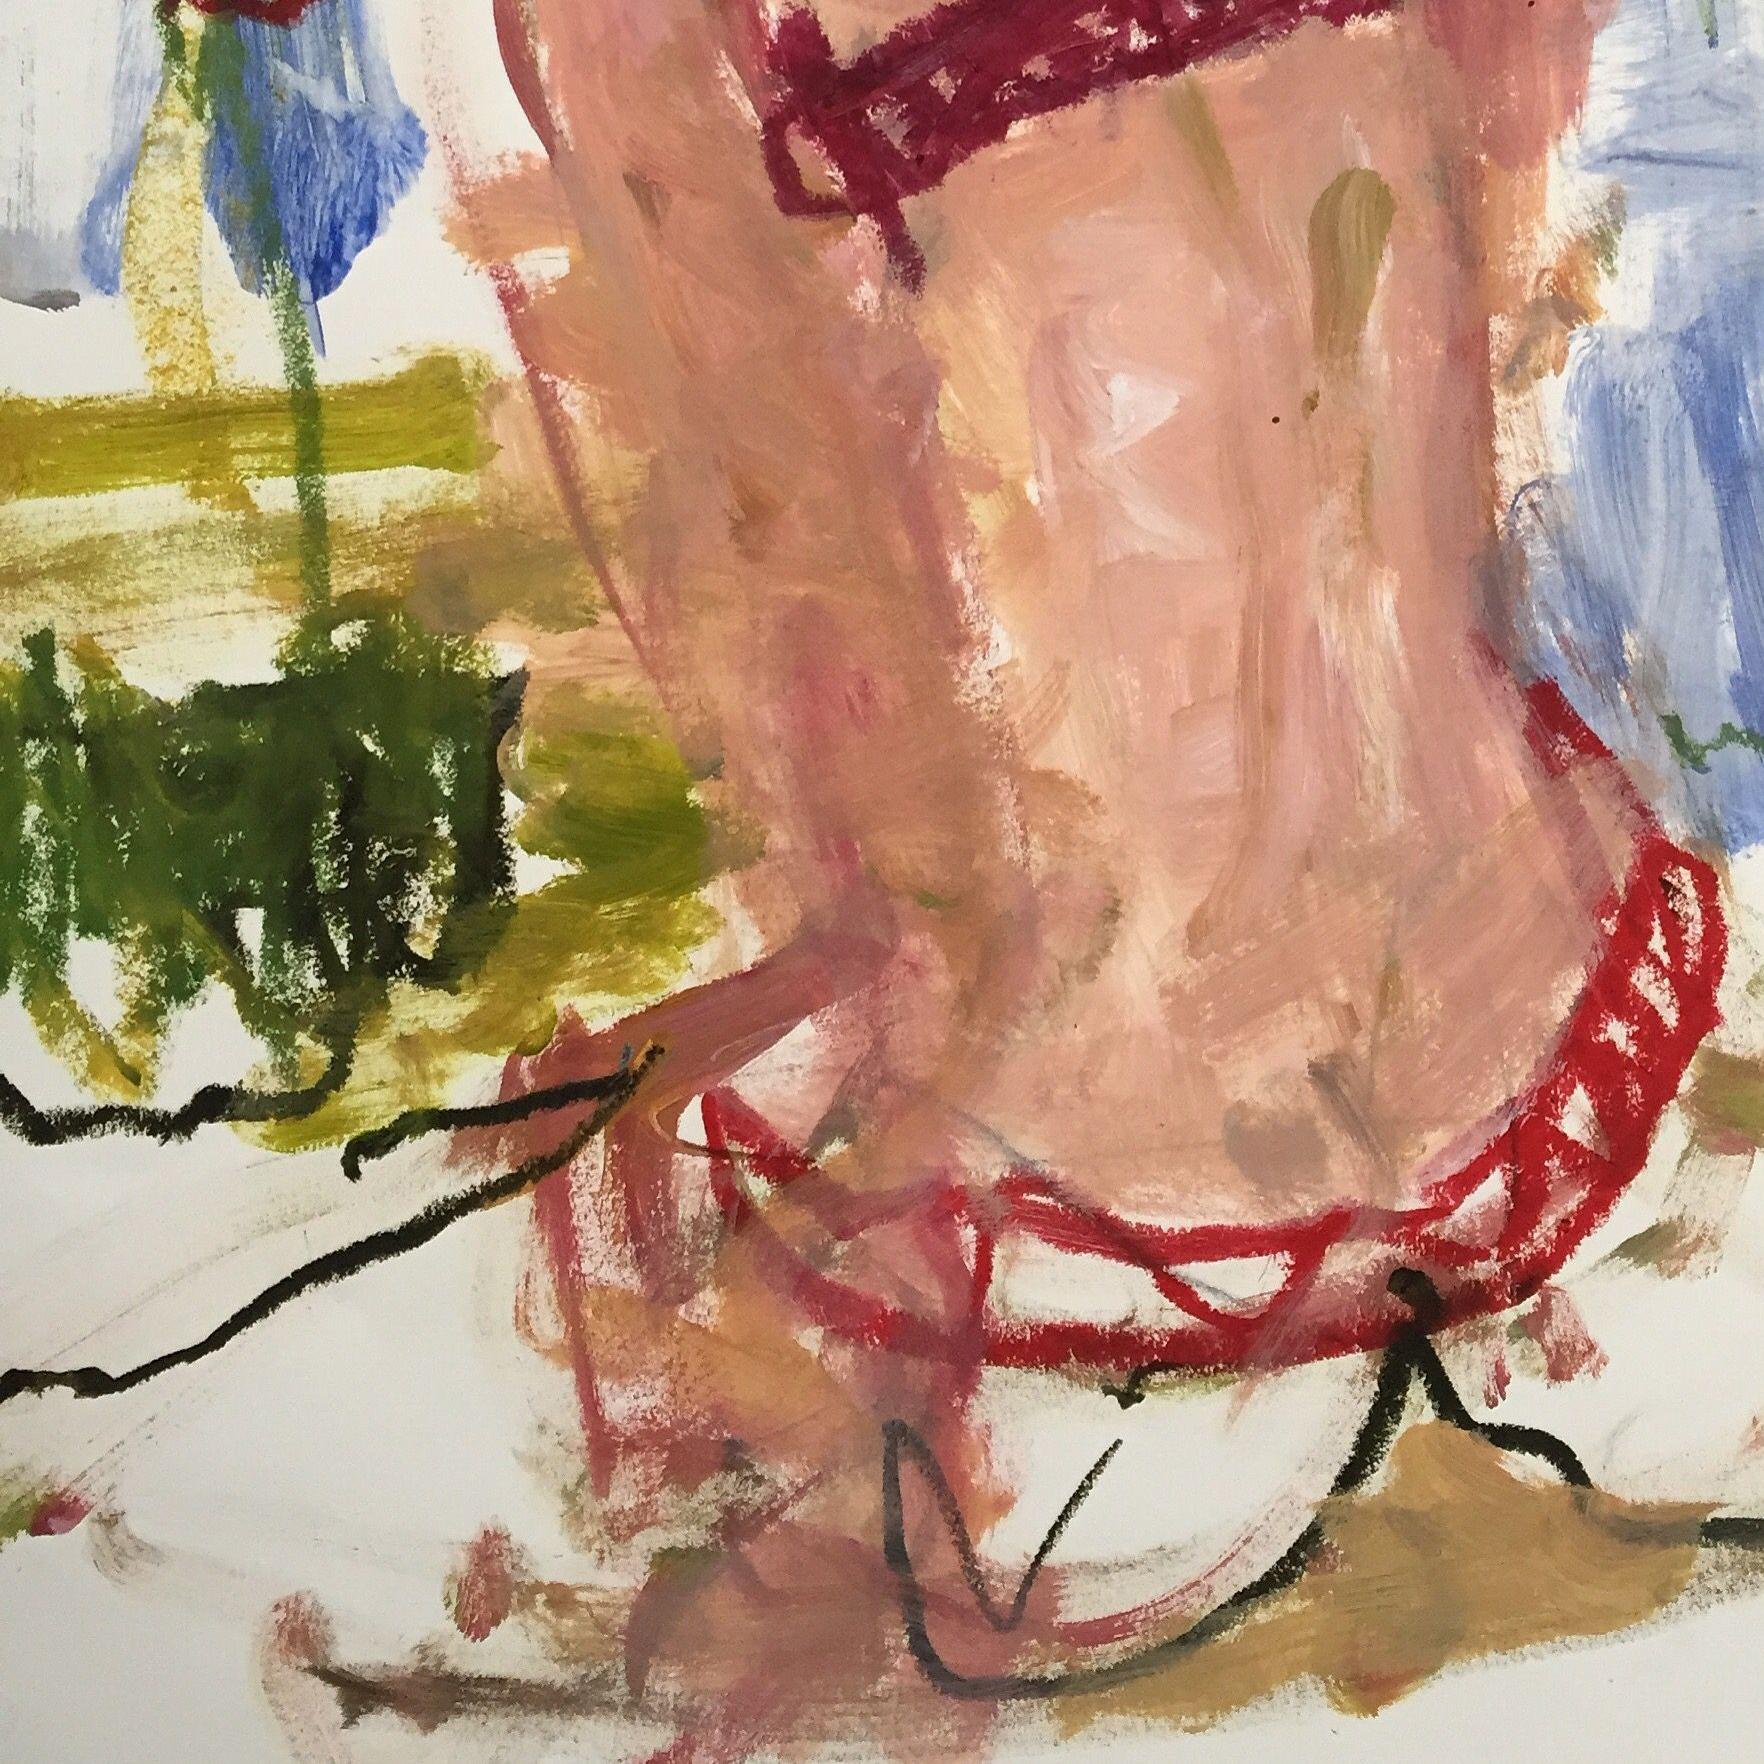 Red Bikini, Mixed Media on Paper - Abstract Mixed Media Art by Lynne Pell